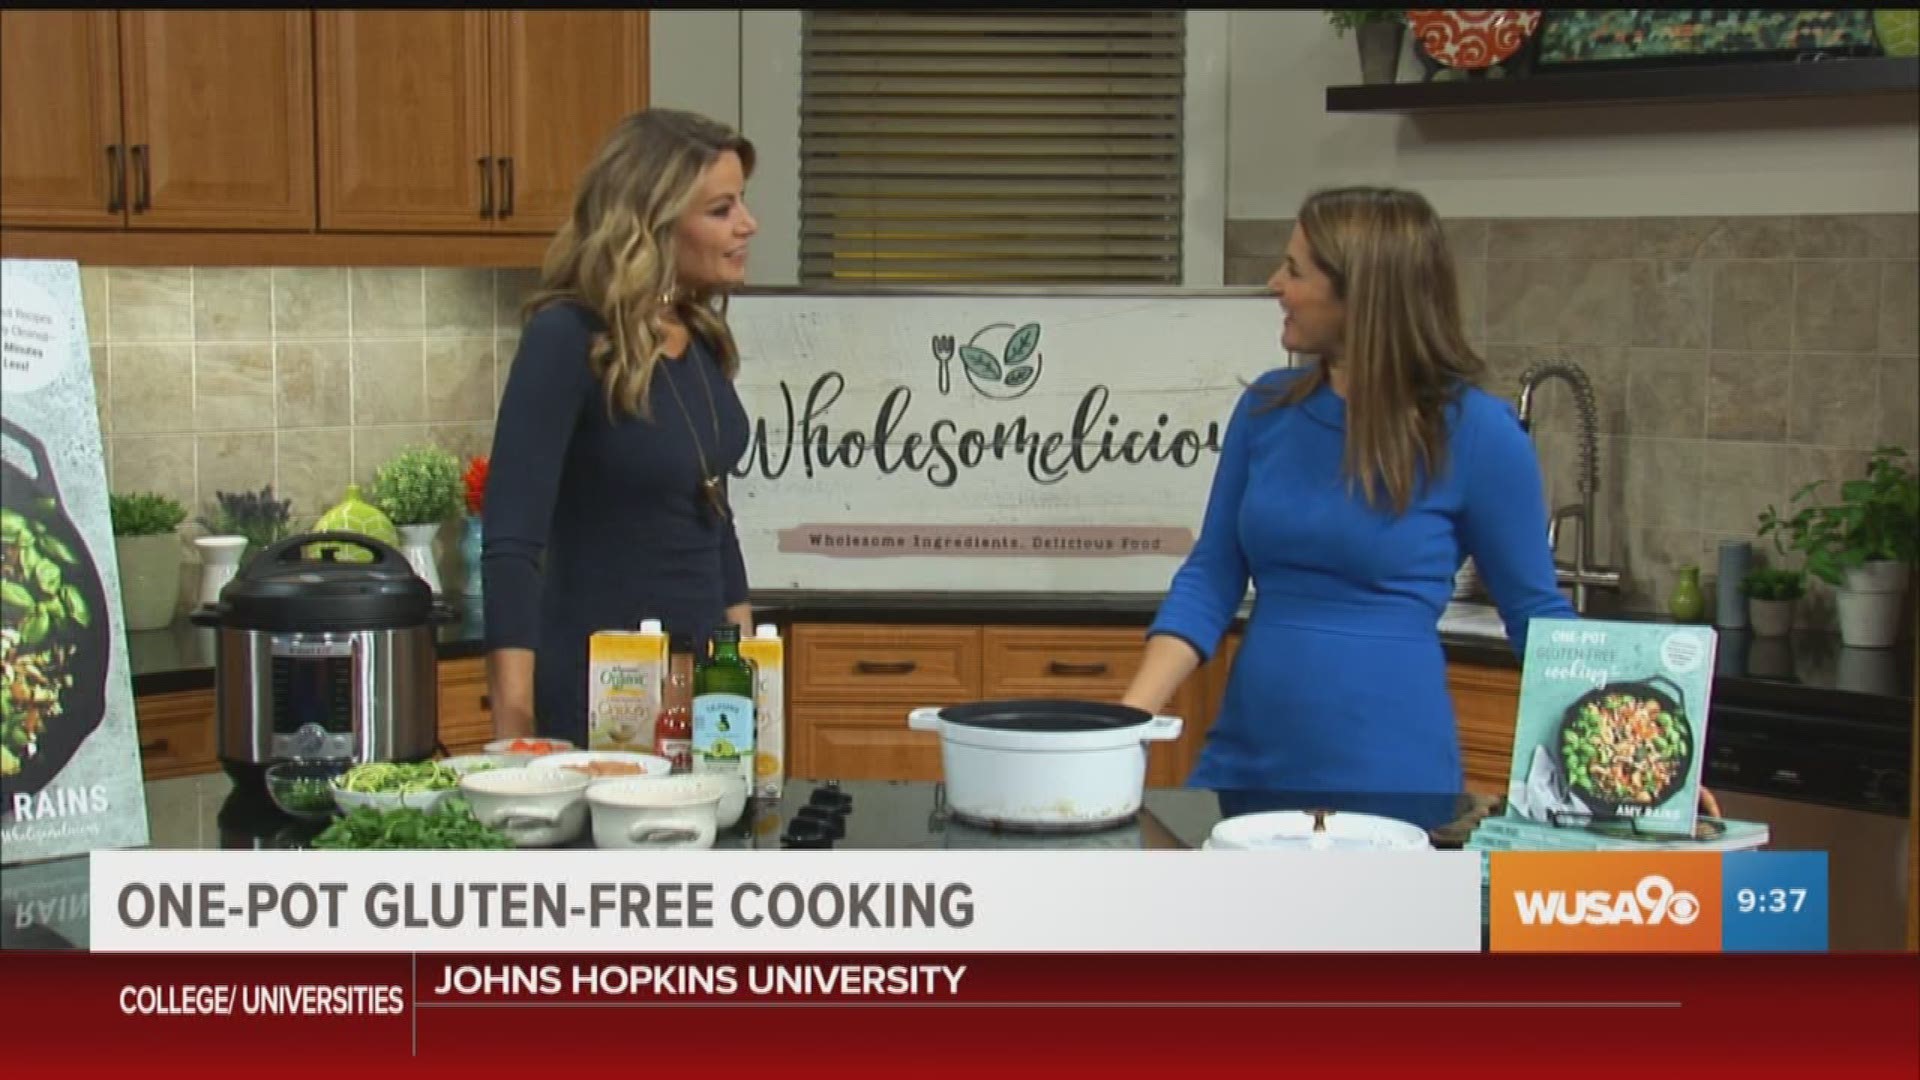 Amy Rains founder of the blog Wholesomelicious and the author of her new book "One-Pot Gluten-Free" shows you how to use healthy ingredients and still have that spectacular taste.